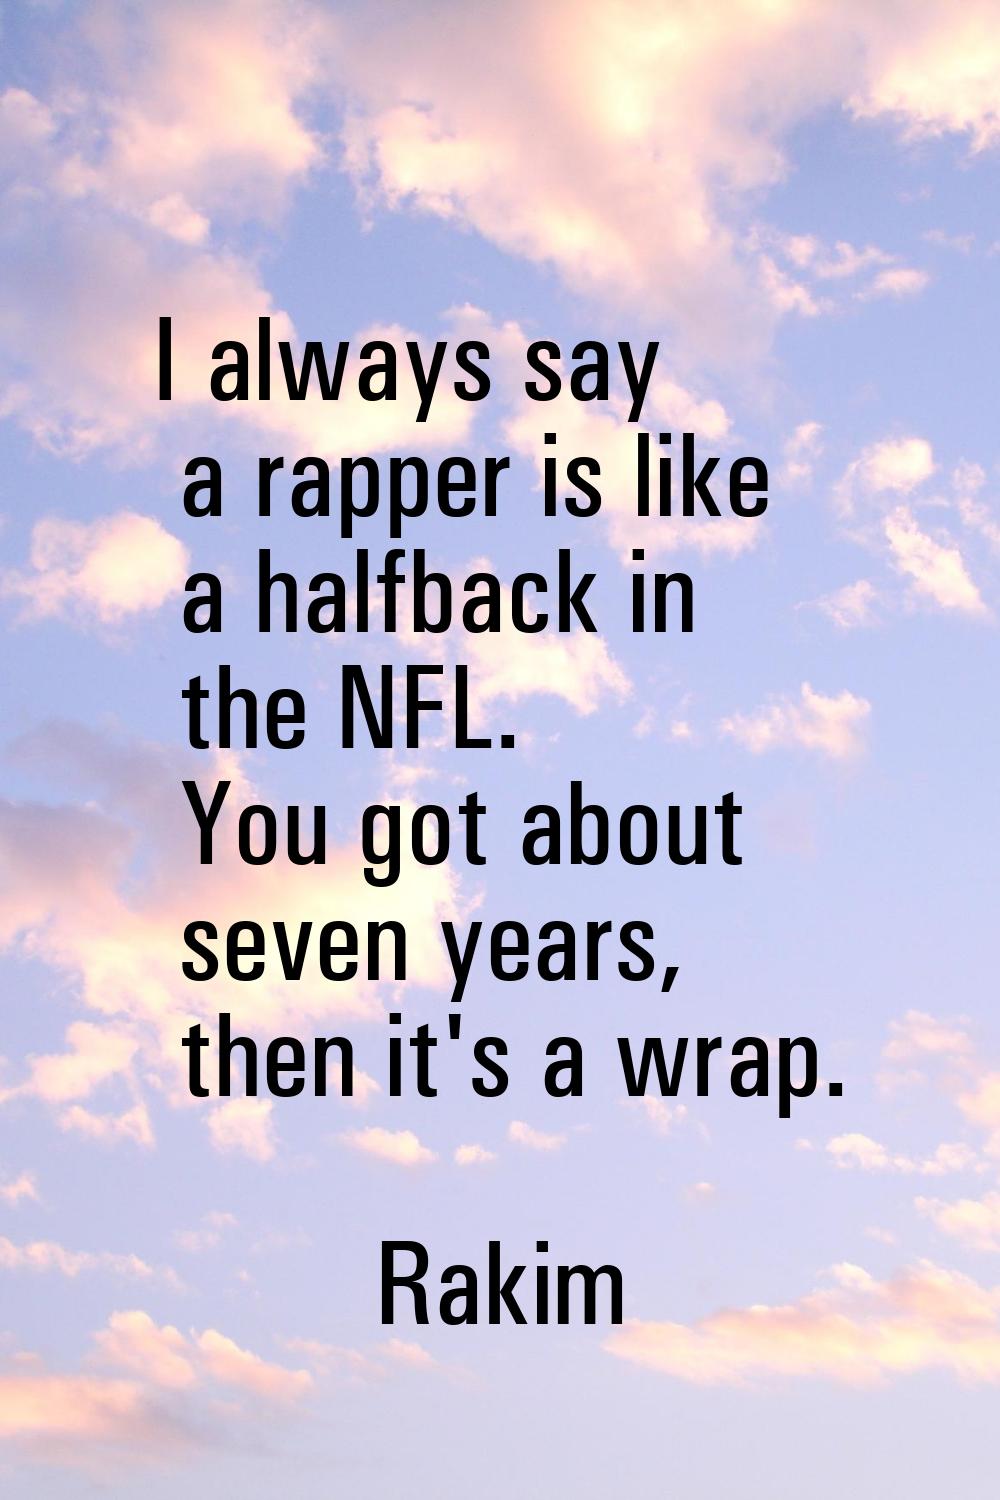 I always say a rapper is like a halfback in the NFL. You got about seven years, then it's a wrap.